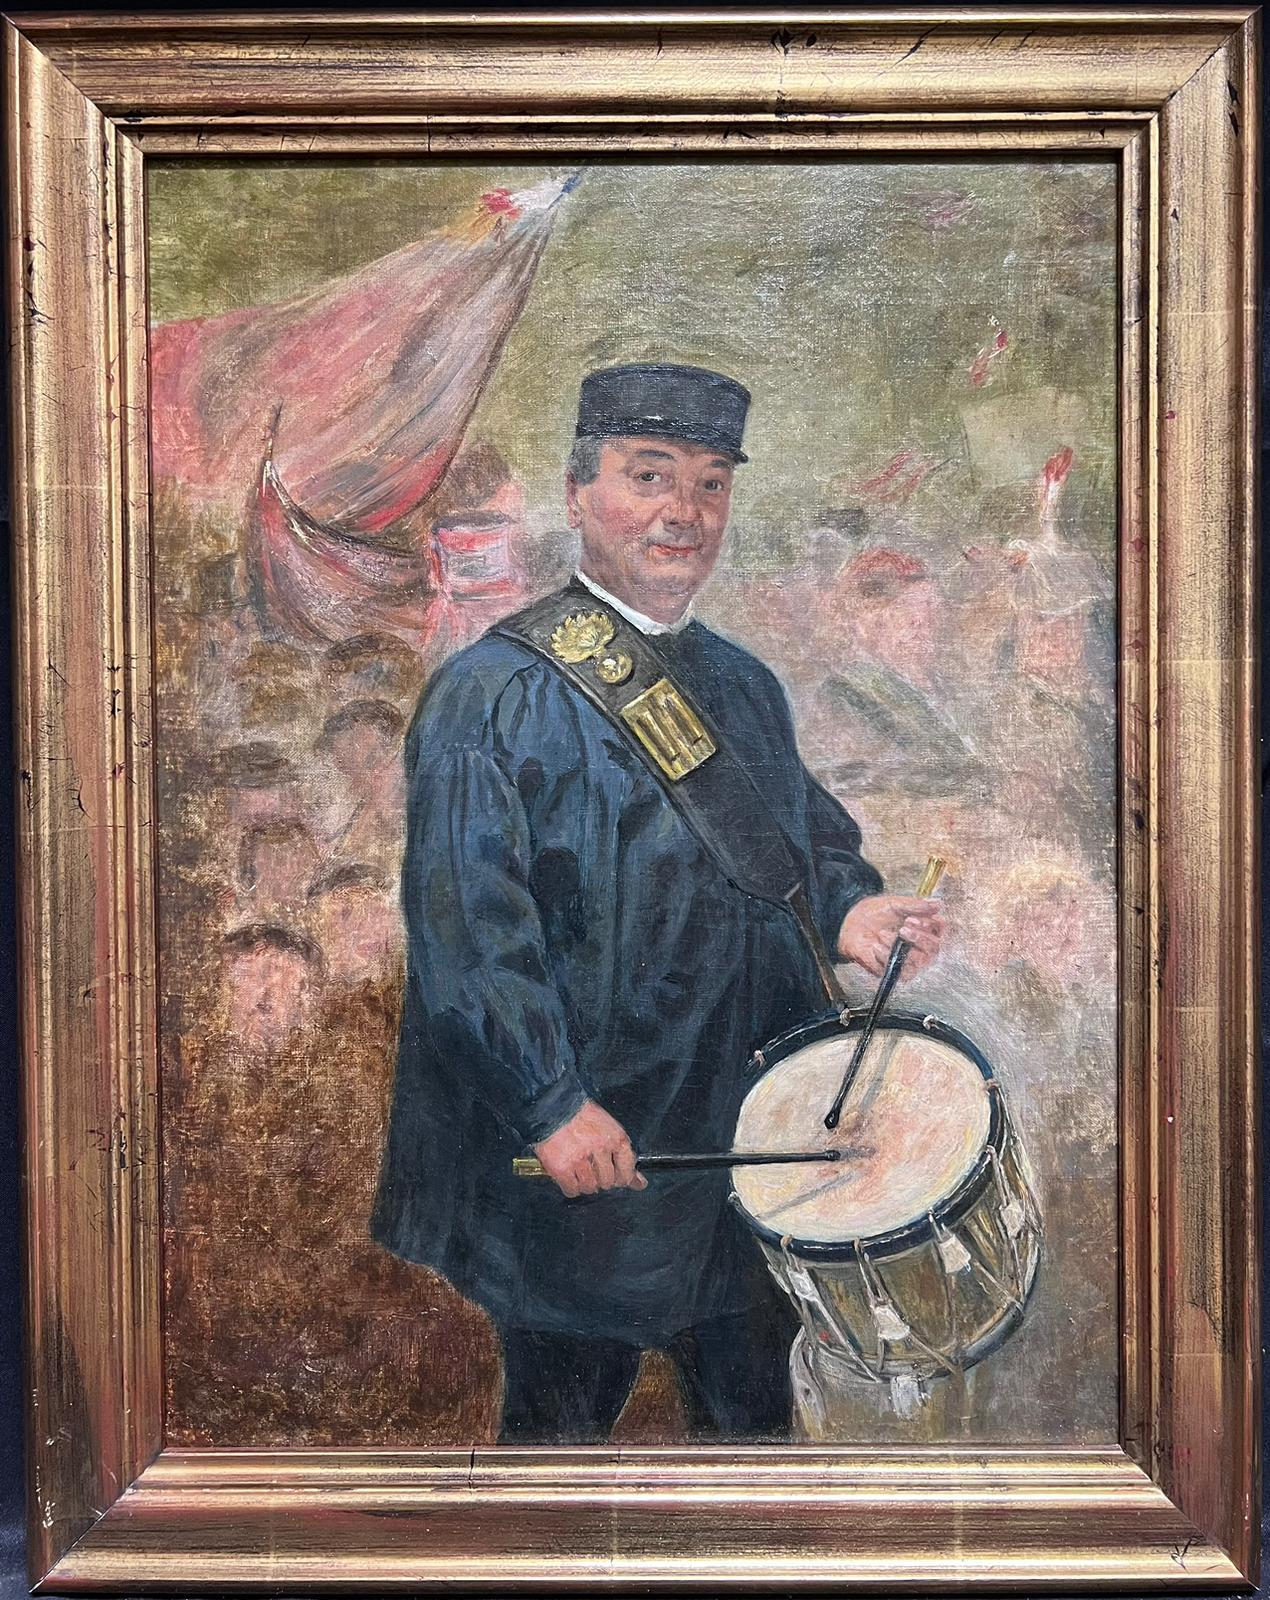 The Drummer
French School, late 19th century
Post-Impressionist School
oil on canvas, framed
framed: 28 x 22.5 inches
canvas: 24 x 18 inches
provenance: private collection, France
condition: very good and sound condition, some wear to the frame